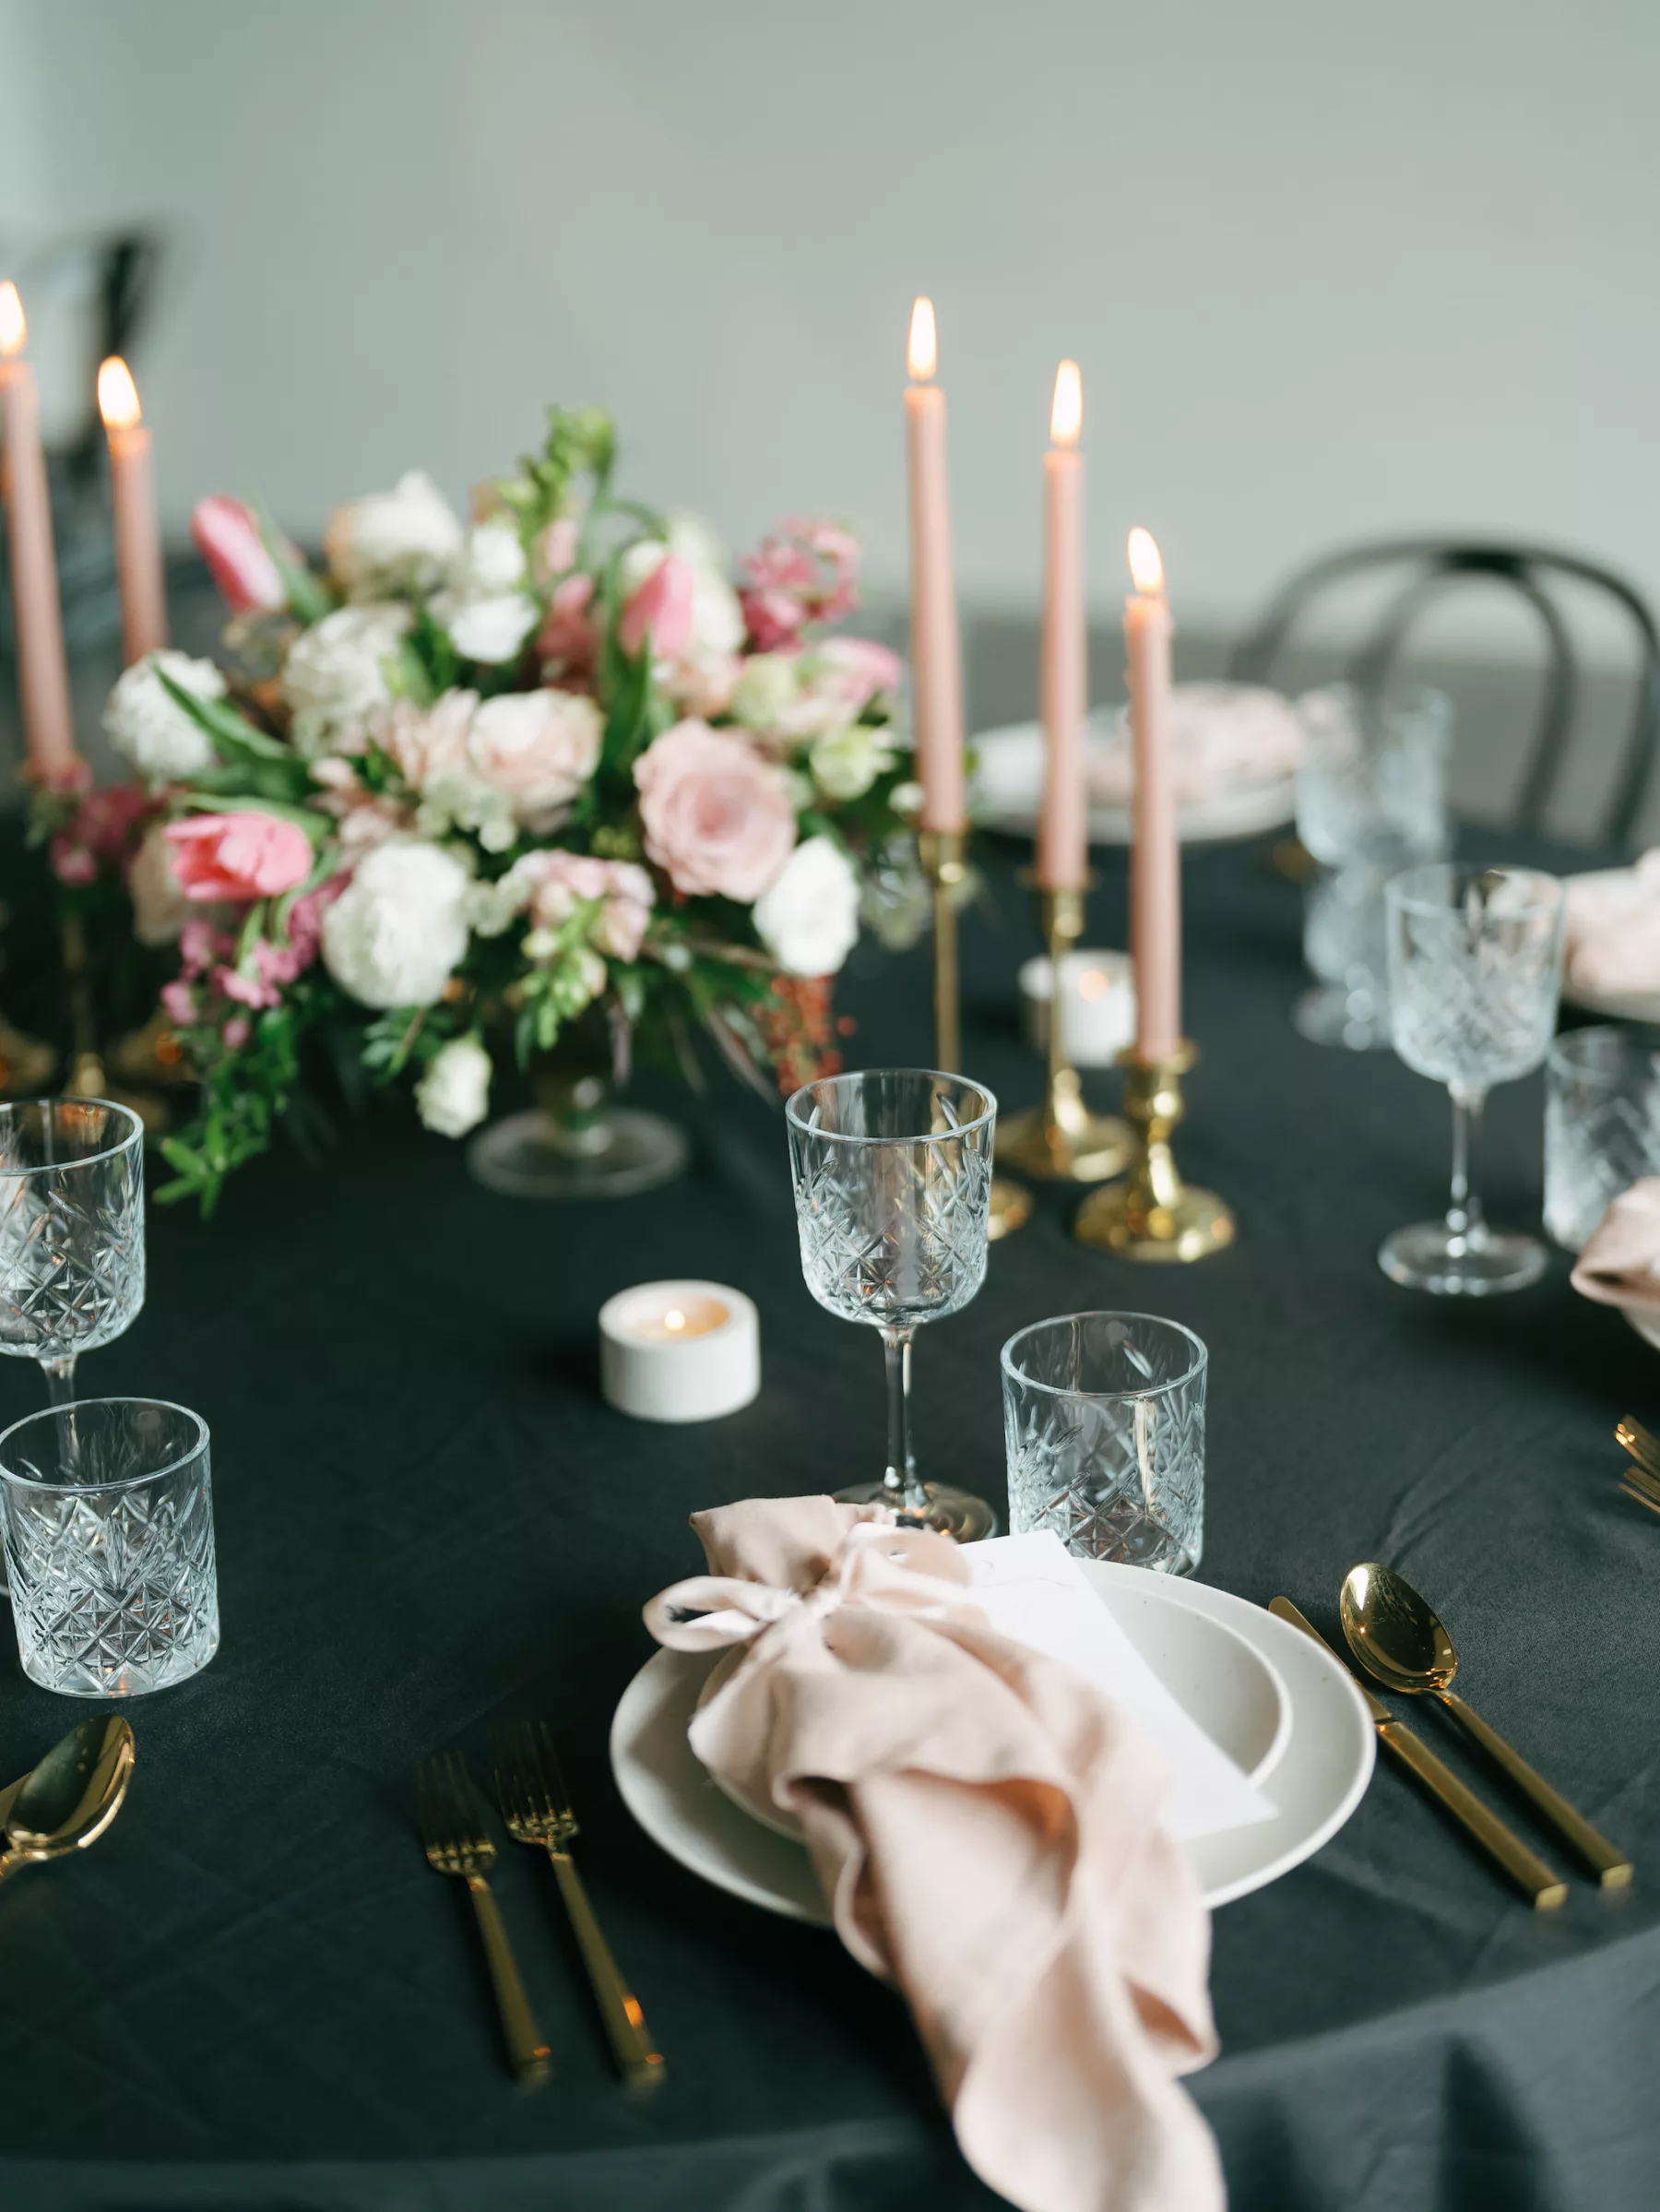 Romantic Blush Pink and Black Wedding Reception Tablescape Place Setting Ideas